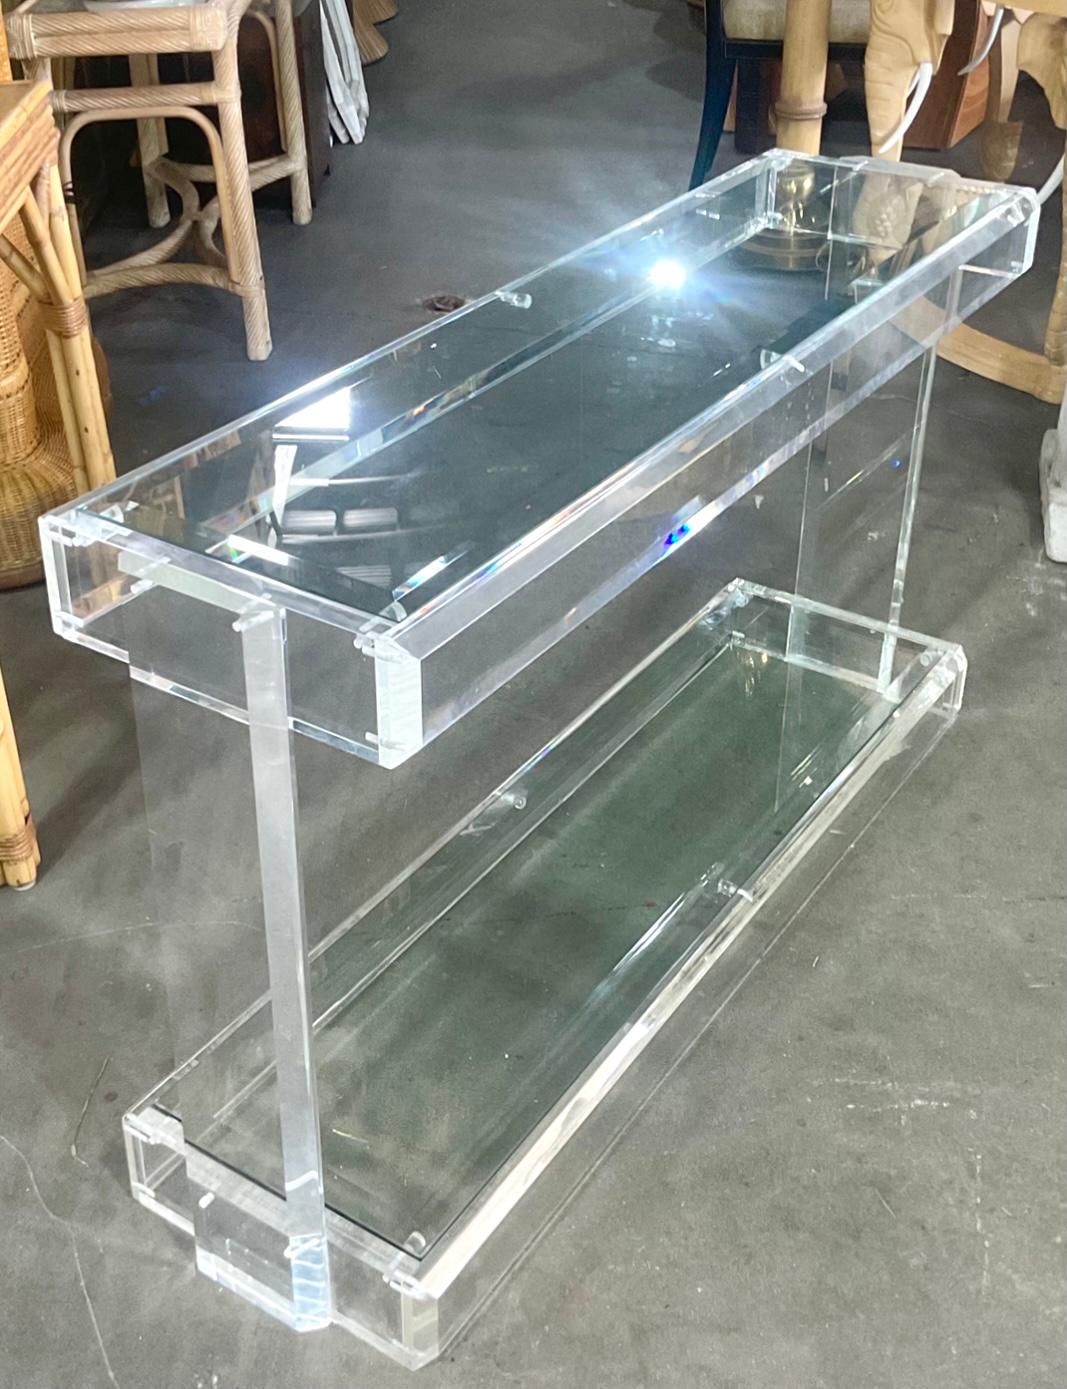 Gorgeous vintage Contemporary Console Table. Beautiful thick sheets of slab lucite are used to create this striking console. Diamond cut with lots of reflective facets. Acquired from Palm Beach estate.